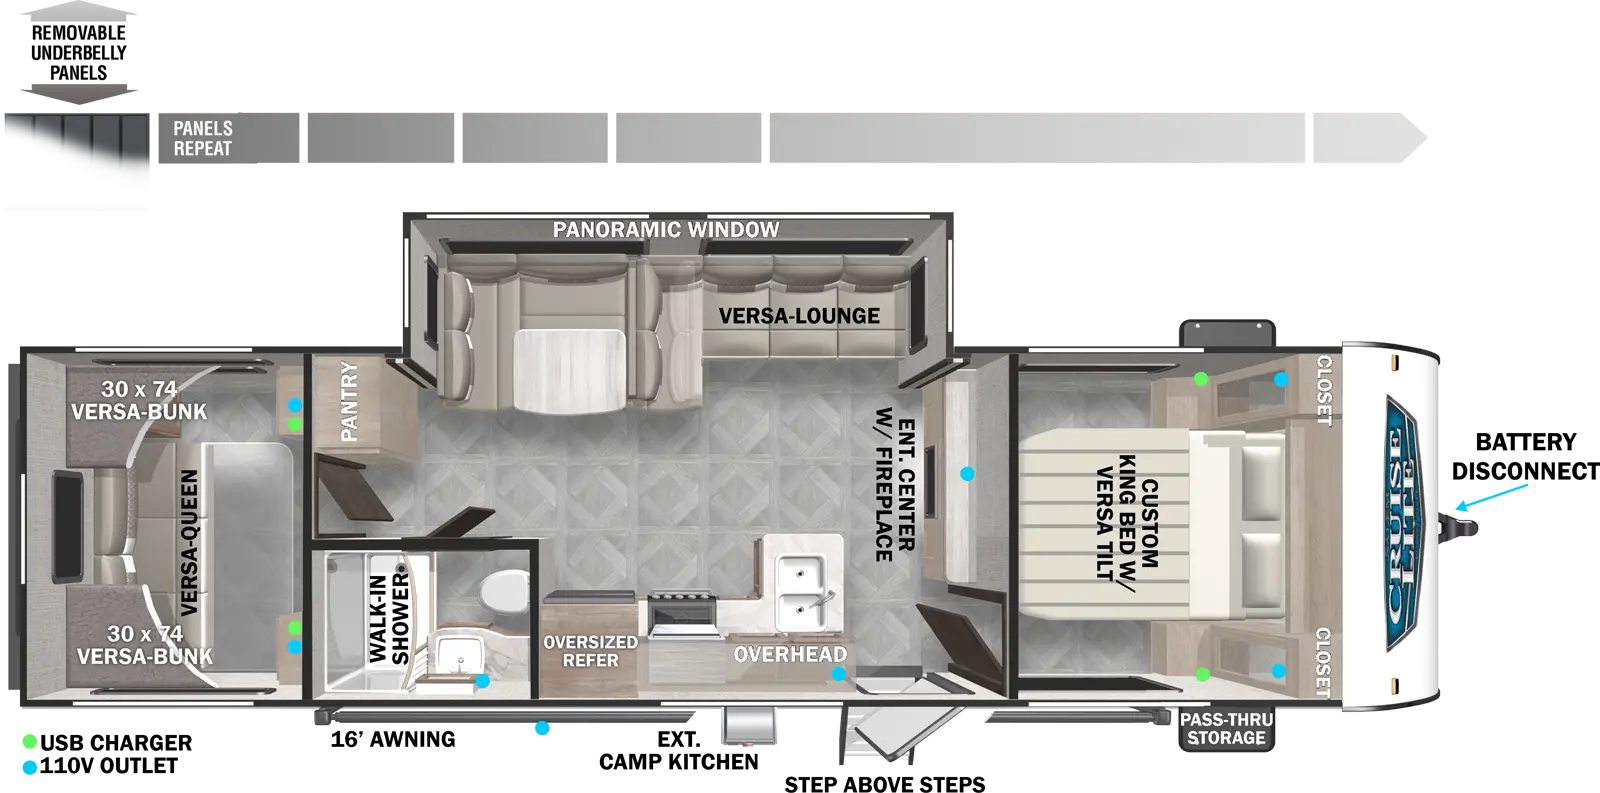 The 28VBXL has one slideout and one entry. Exterior features include a 16 foot awning, exterior camp kitchen, step above entry steps, front pass-thru storage, battery disconnect, and removable underbelly panels. Interior layout front to back: versa-tilt custom king bed with closets on each side; entertainment center with fireplace along inner wall; off-door side slideout with versa lounge/u-dinette and panoramic window; door side entry and kitchen with peninsula countertop with sink, overhead cabinet, and oversized refrigerator; door side full bathroom with walk-in shower; off-door side pantry along inner wall; rear bunk room with versa bunks on each side above a versa queen.